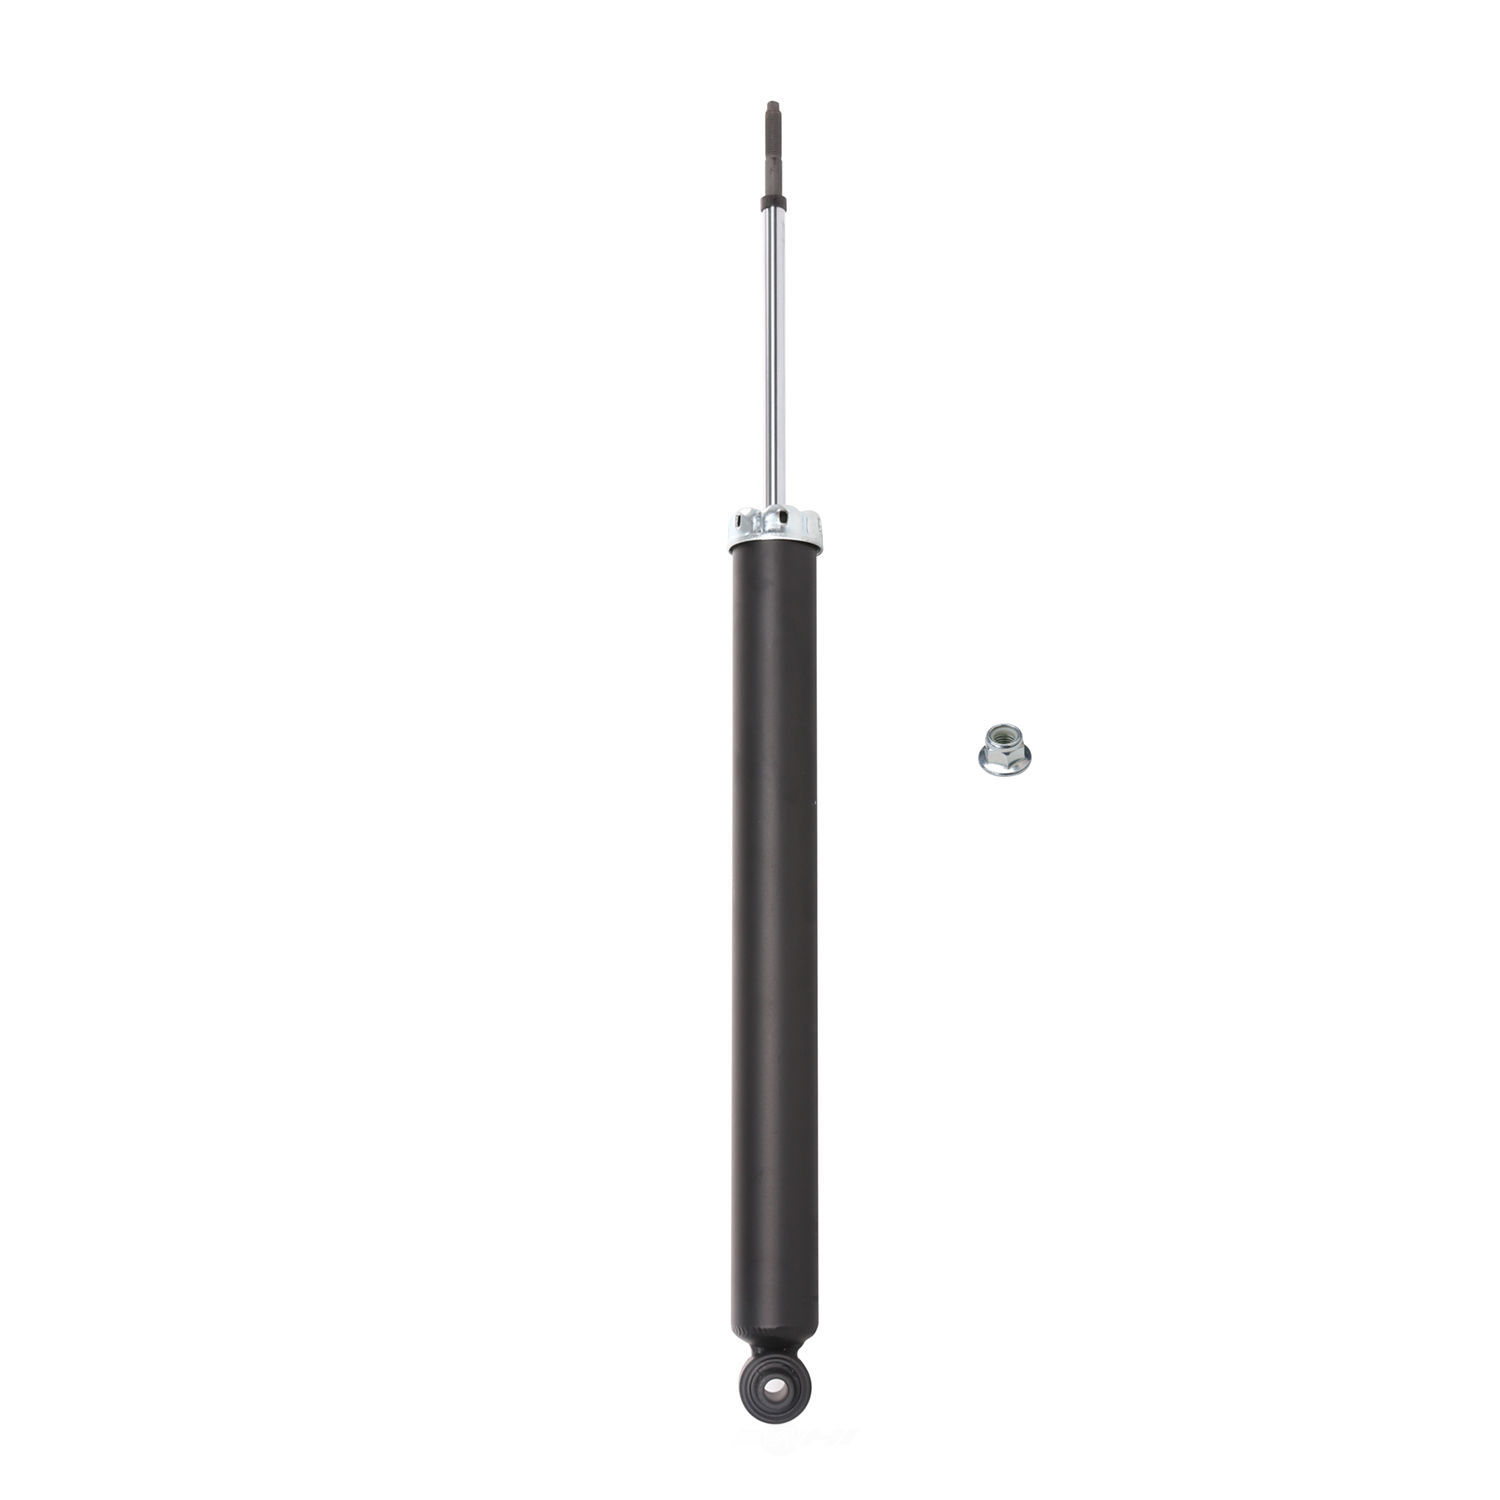 PERFORMANCE RIDE TECHNOLOGY BY ADD - Suspension Strut - P6T 373250